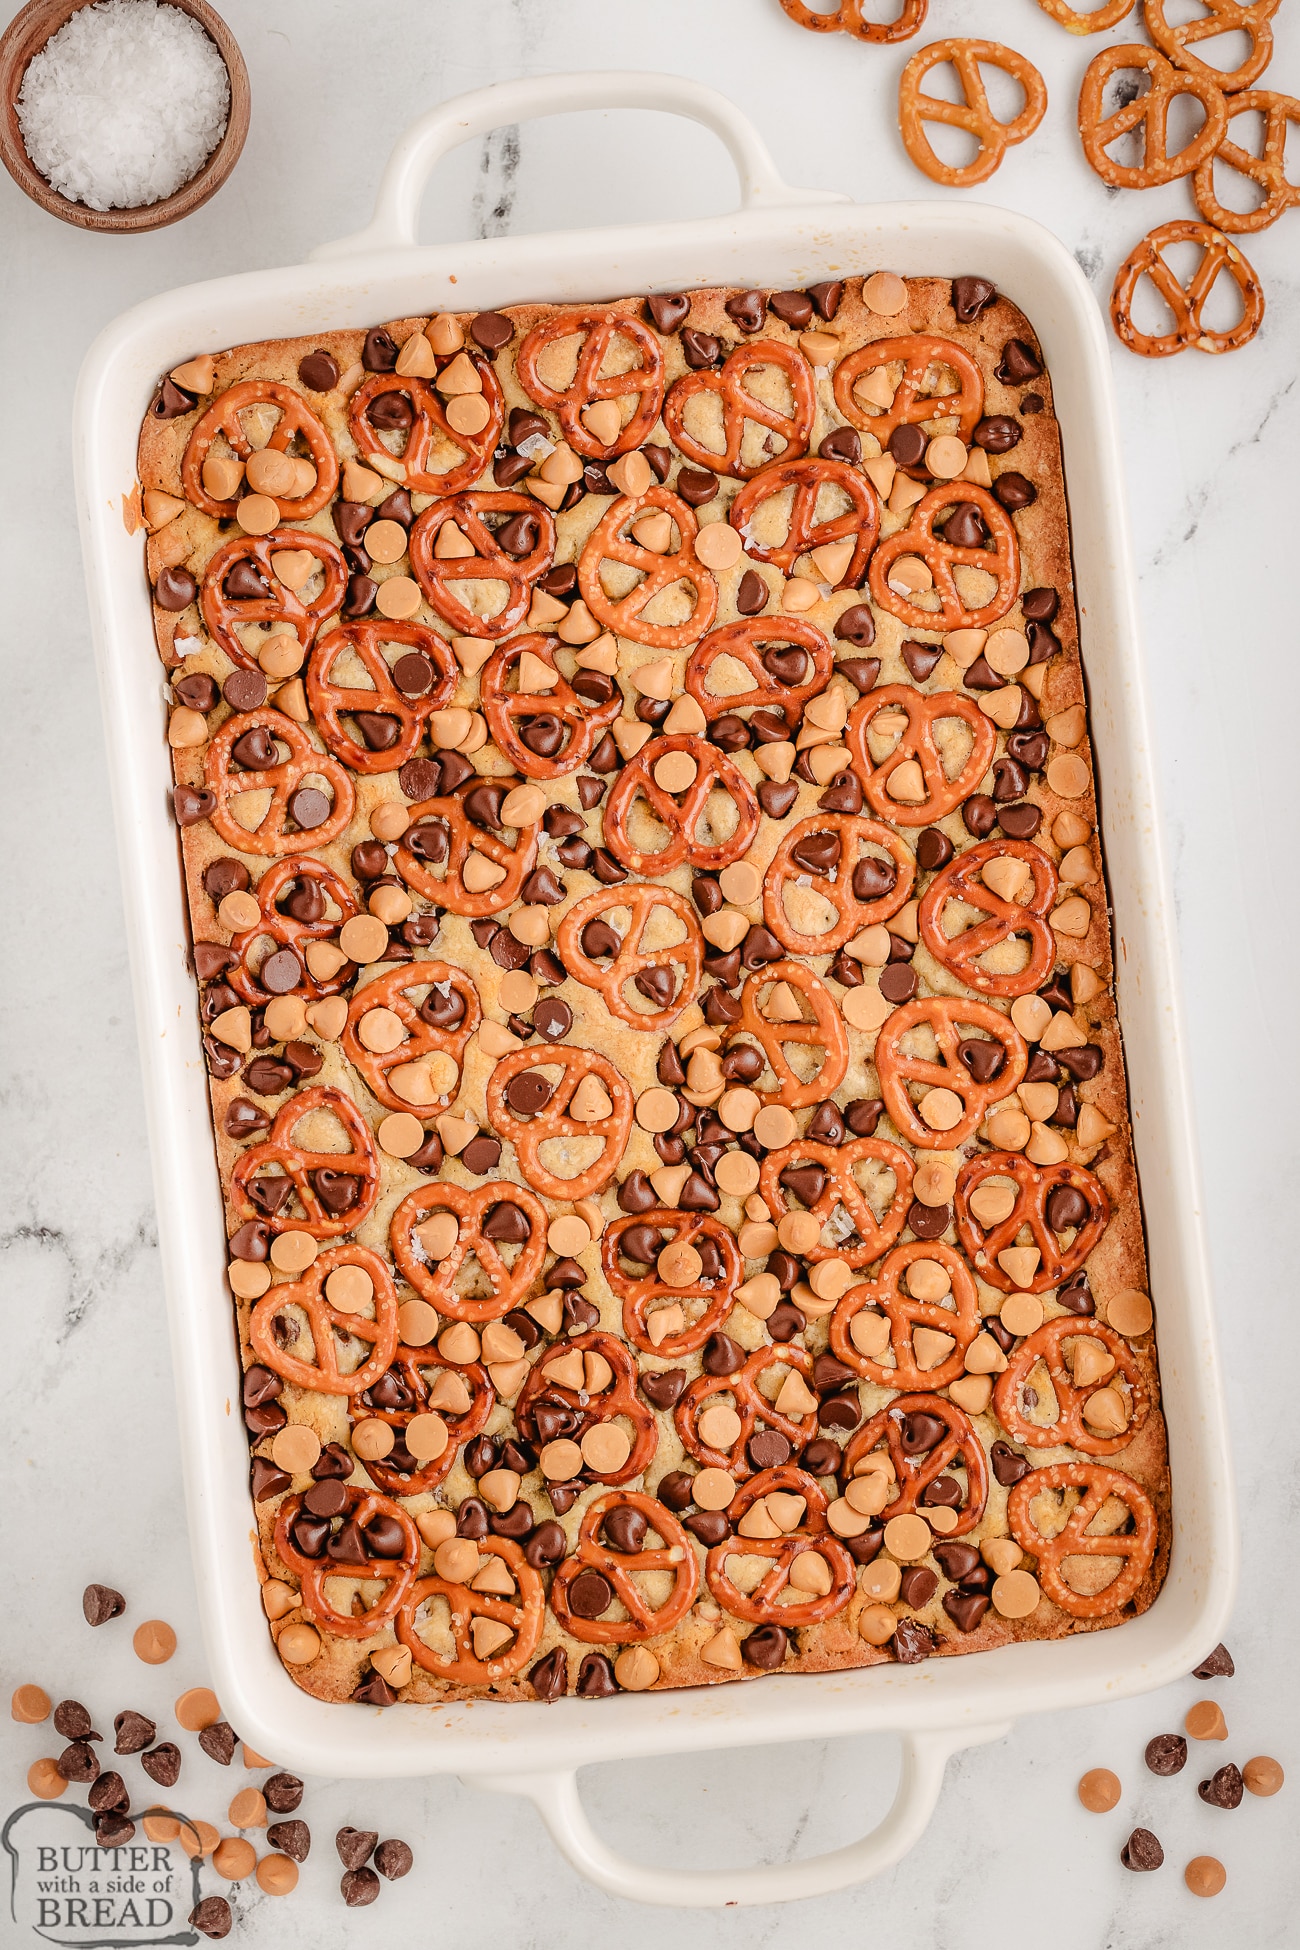 pan of cookie bars made with butterscotch and pretzels